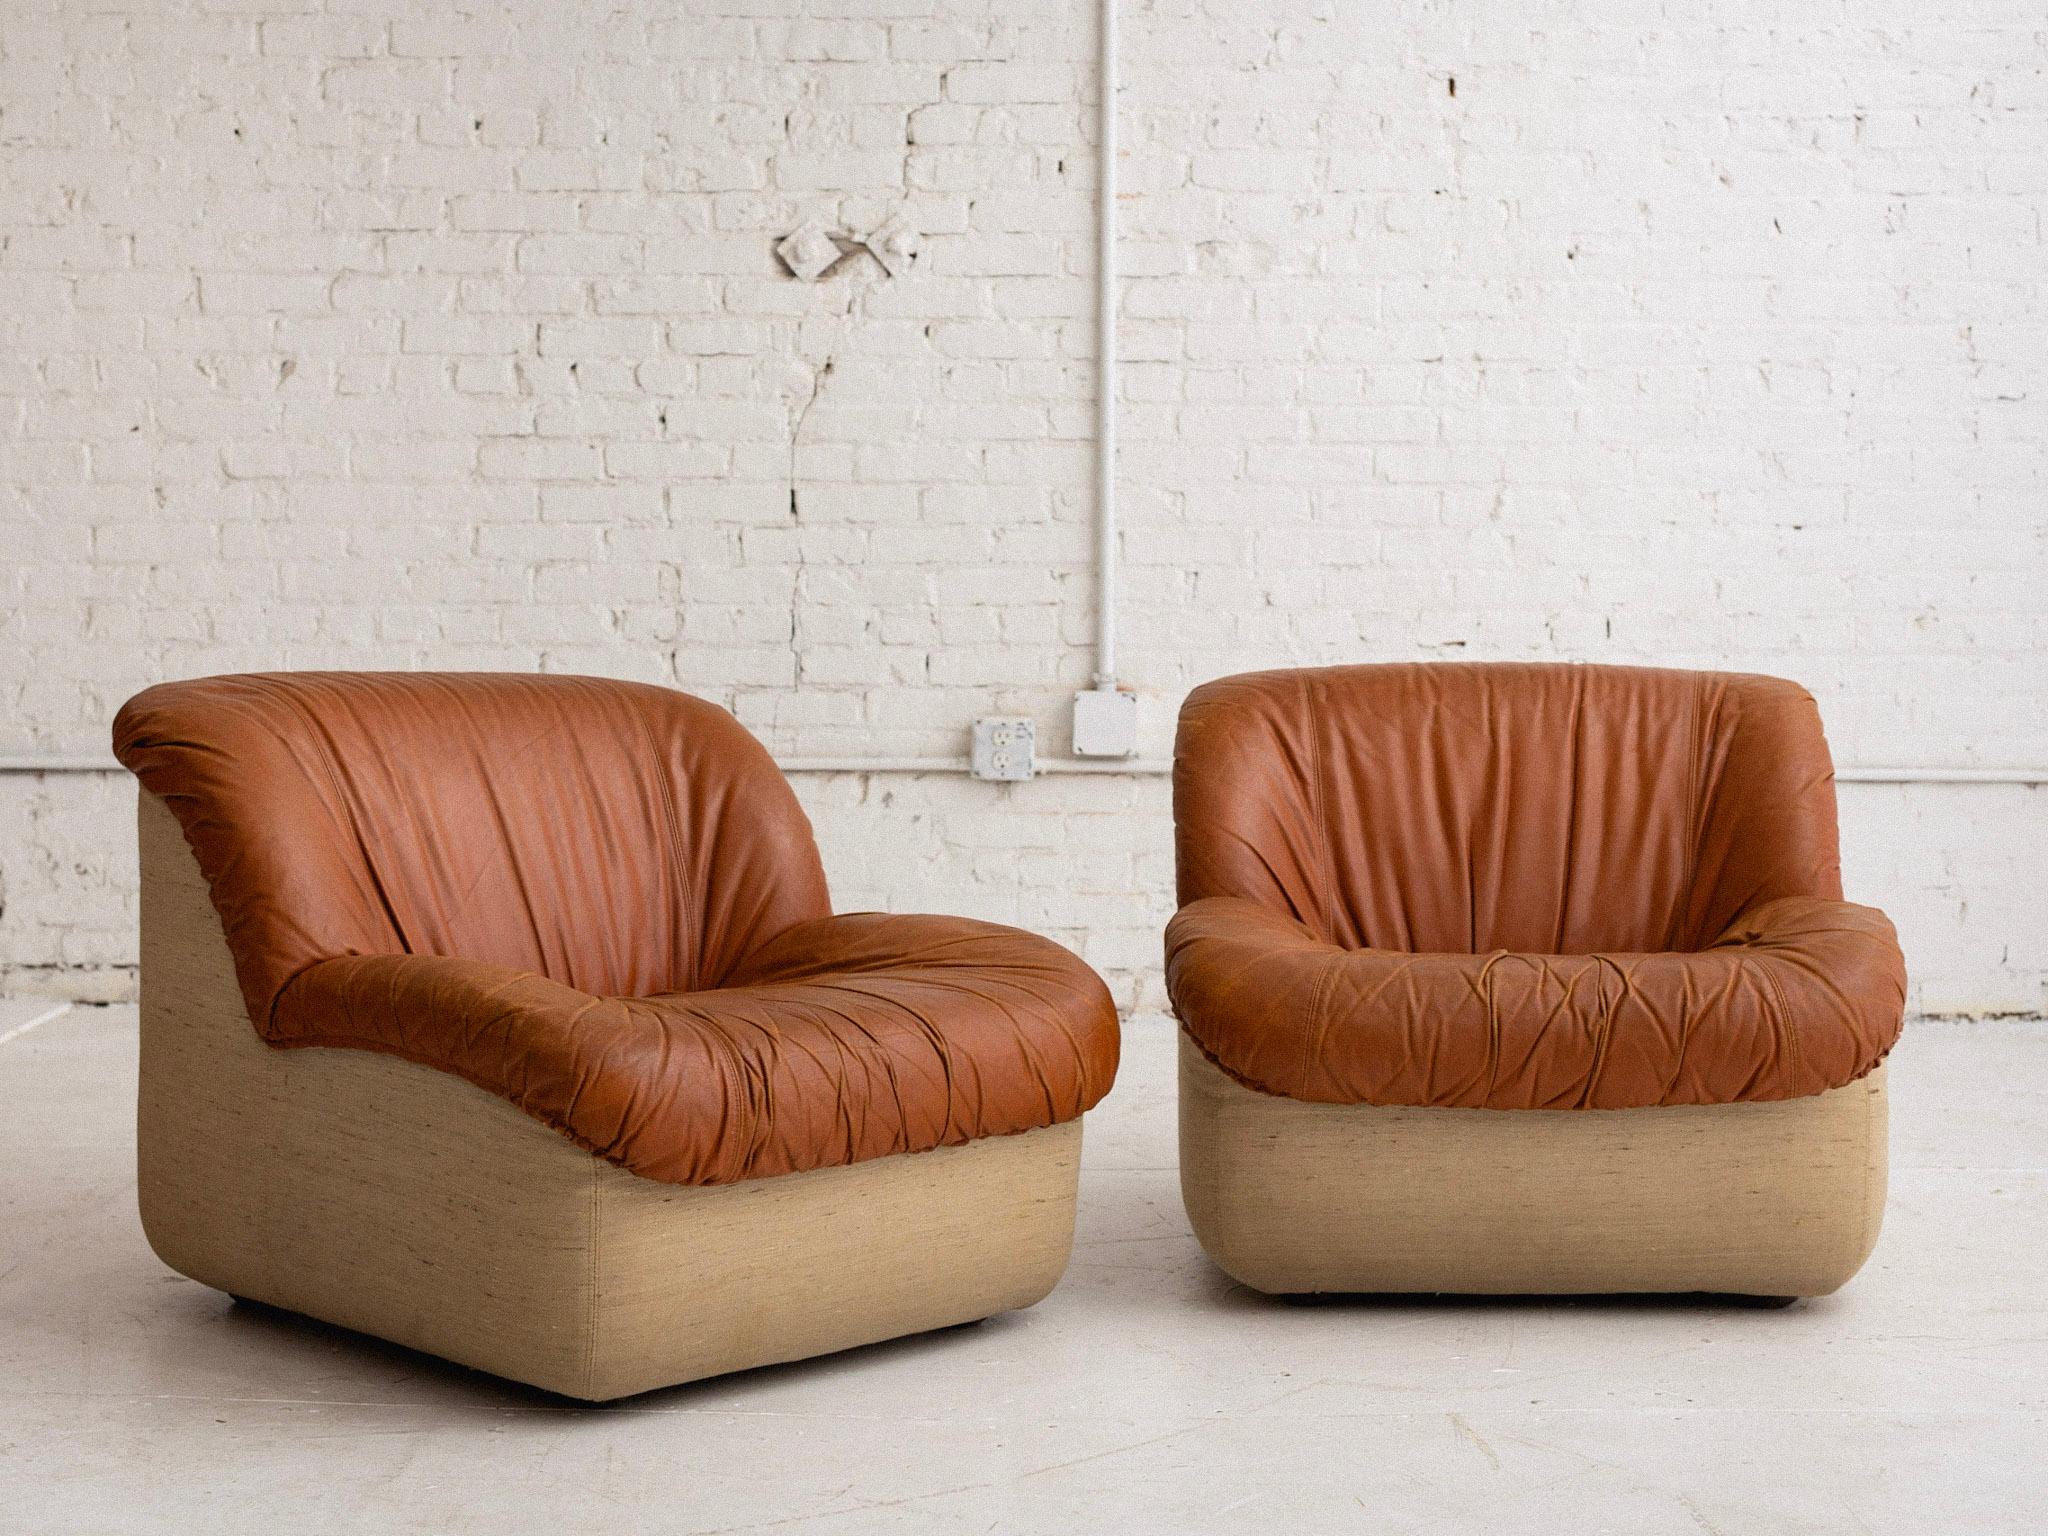 Henning Korch for Swan 'Caprice' Leather Chair / Modular Seating en vente 8